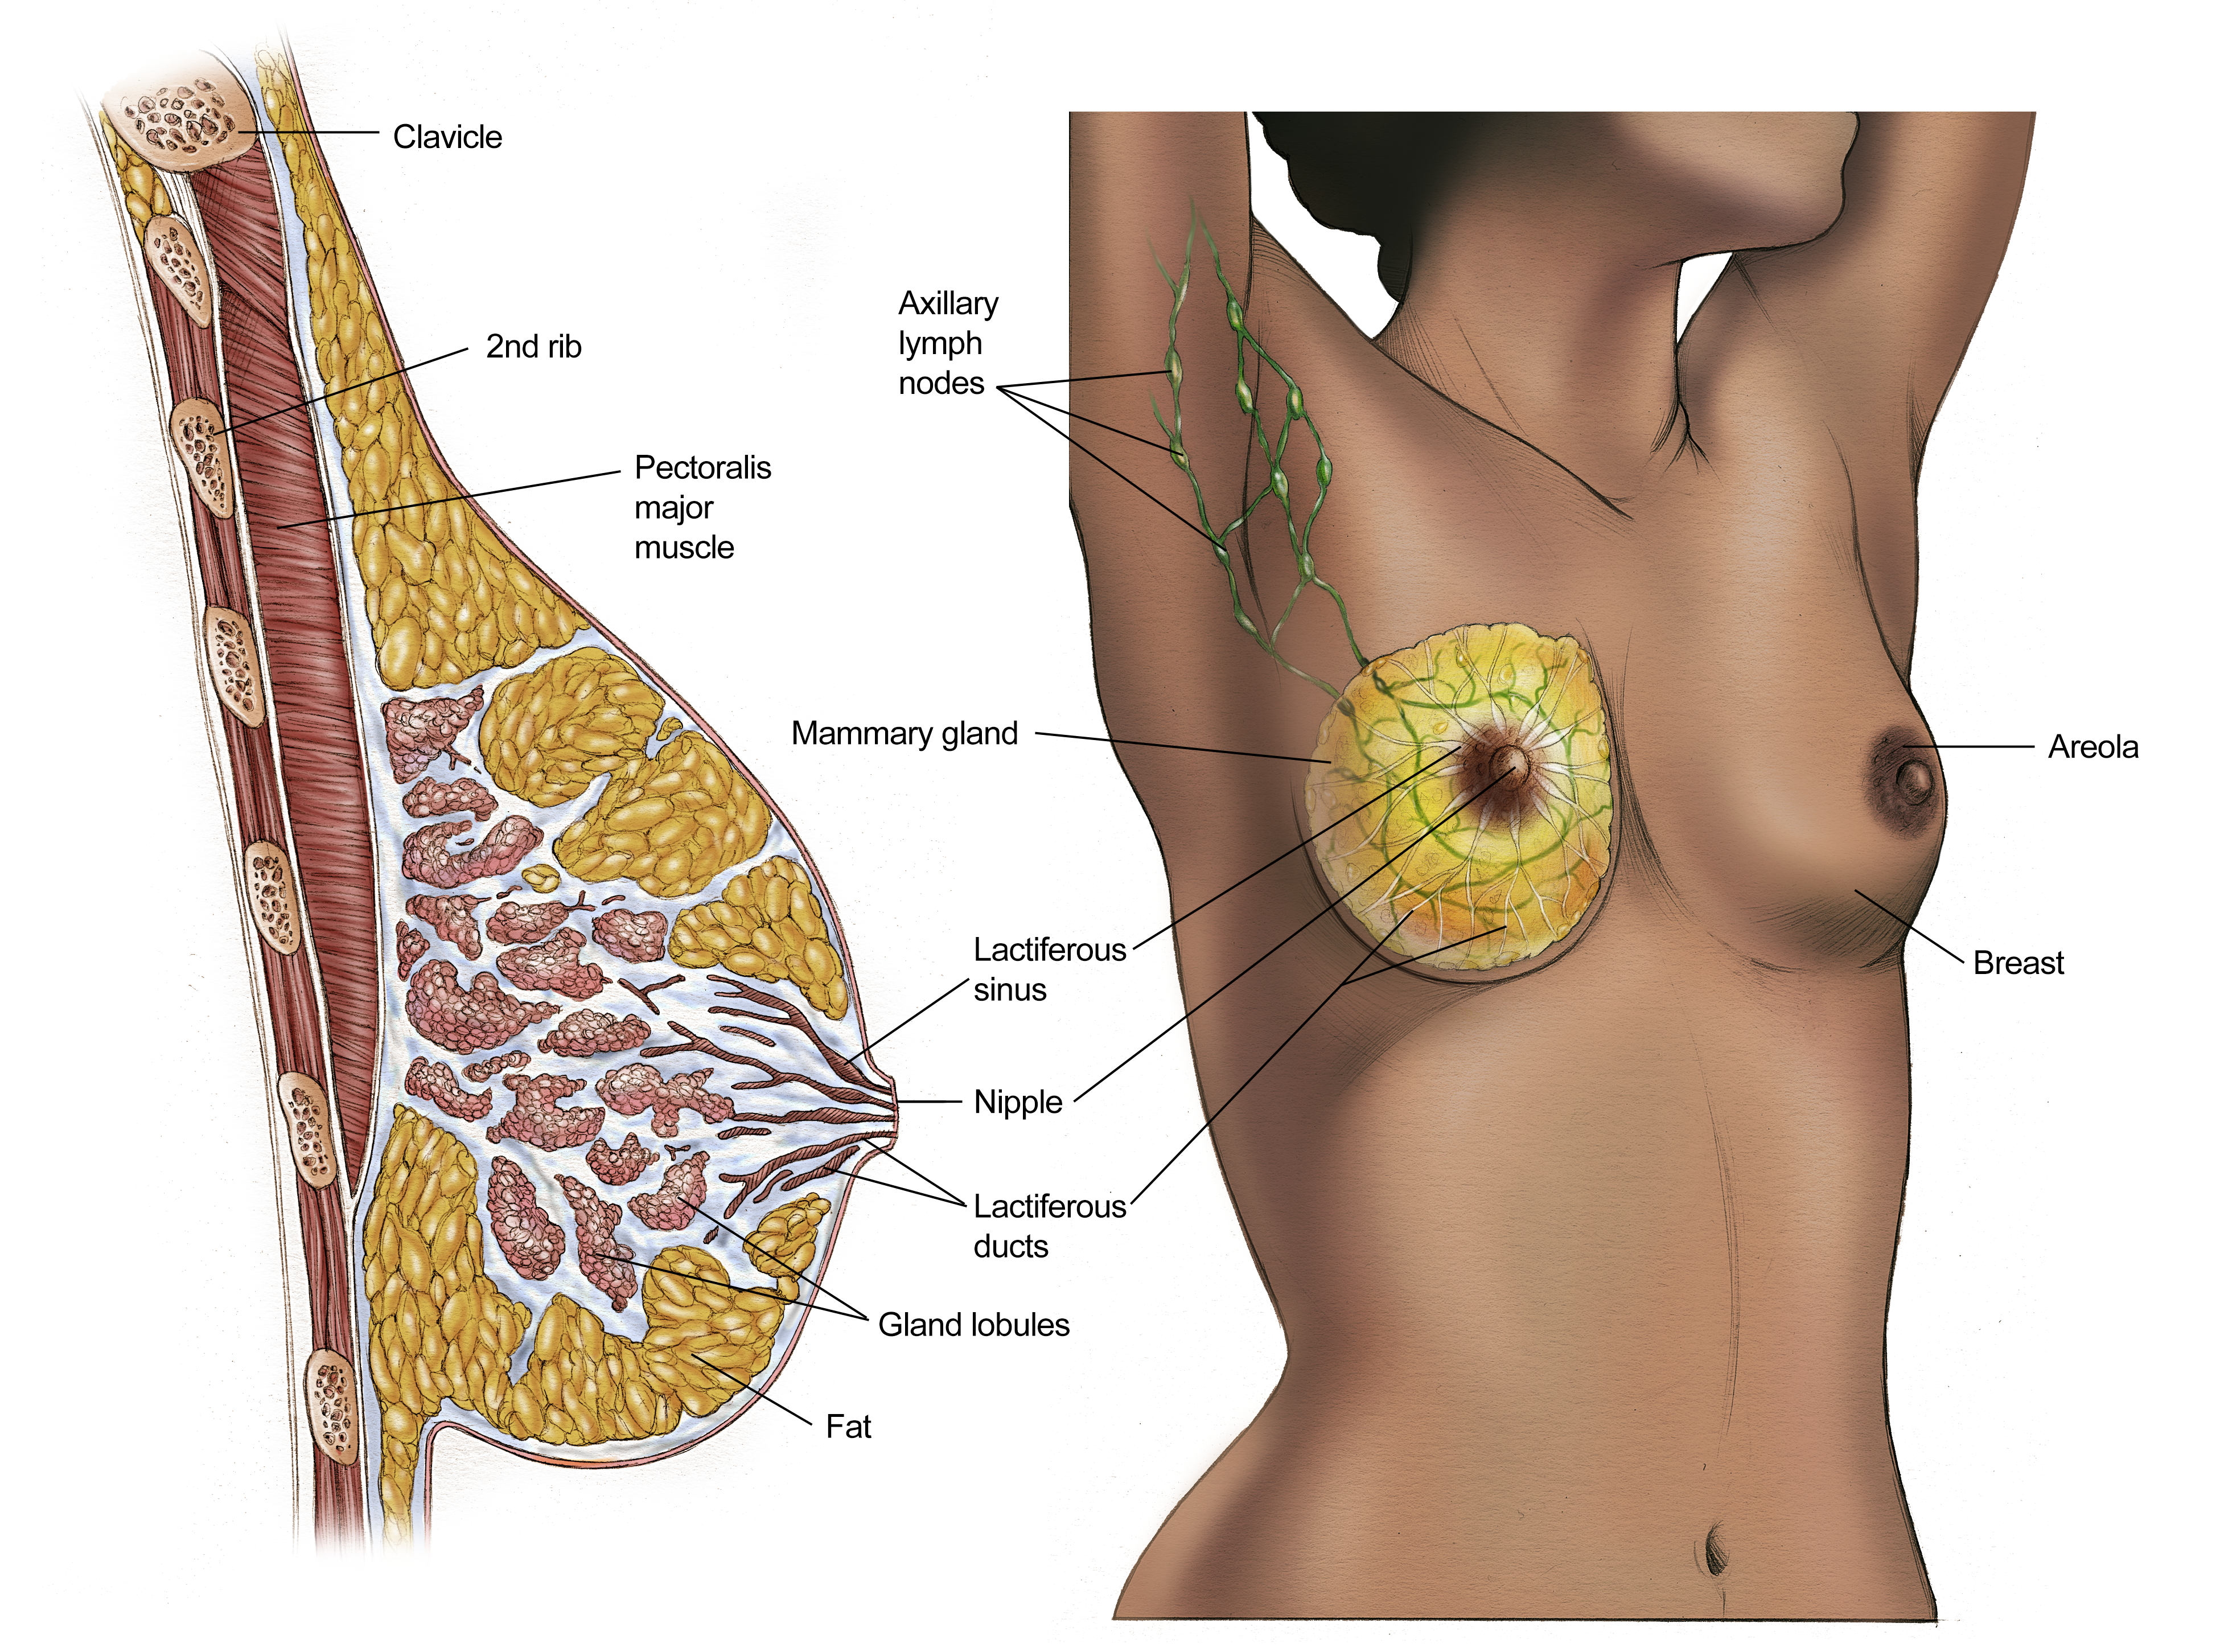 Illustration of breast tissue shown on a Black woman